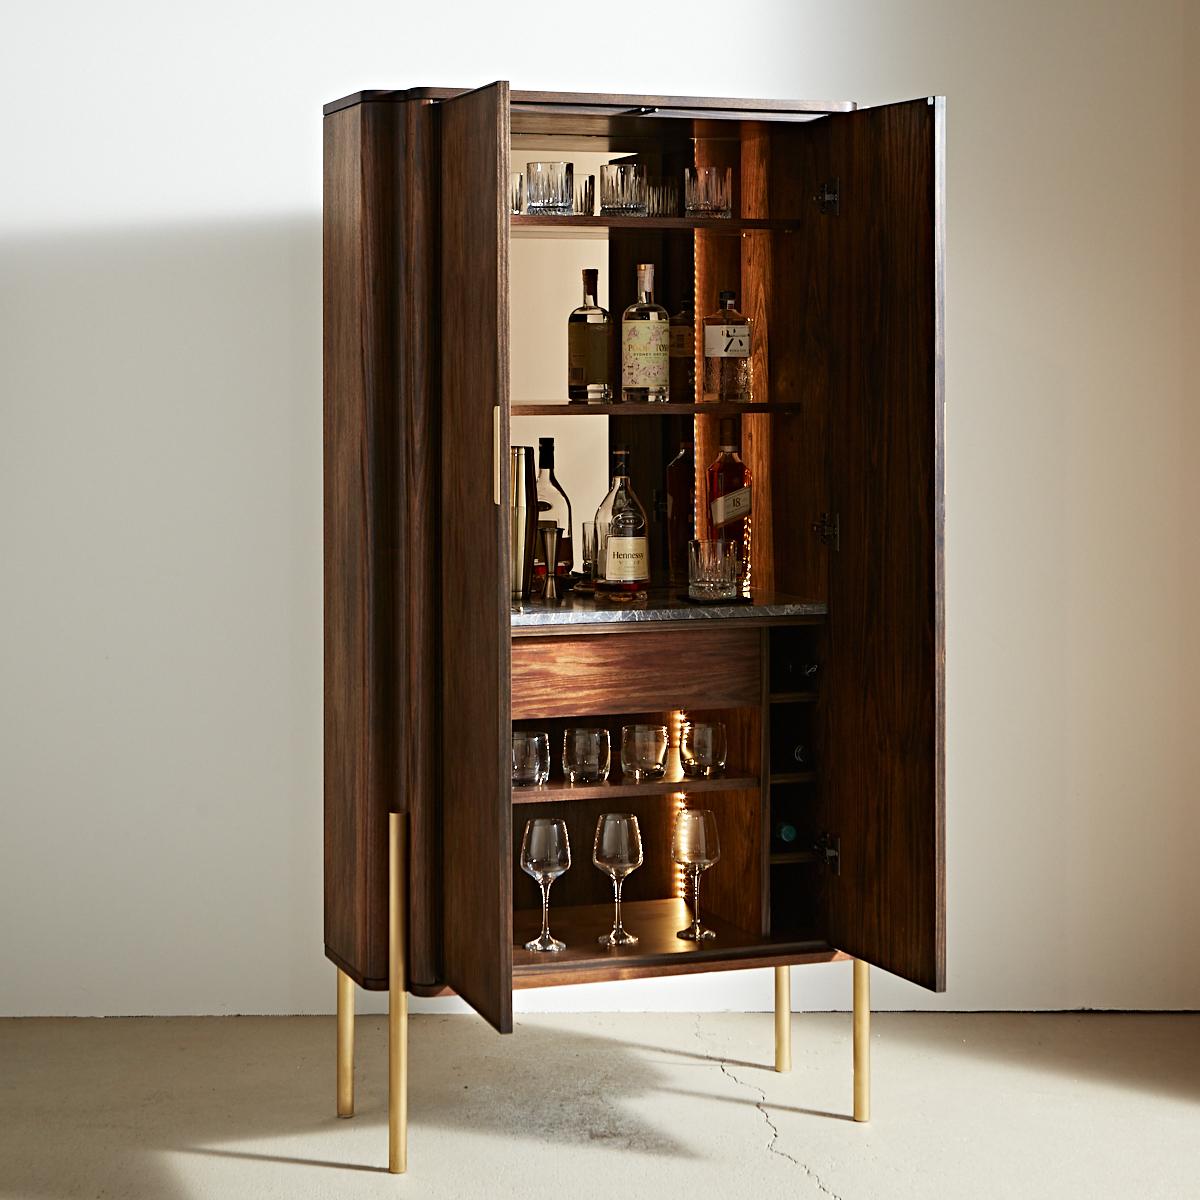 A uniquely Australian take on smoking jacket luxury, this tall bar room centrepiece can be crafted in a range of custom hardwoods with brass accents which age gracefully and develop a beautiful soft patina unique to its time with you.

Designed for